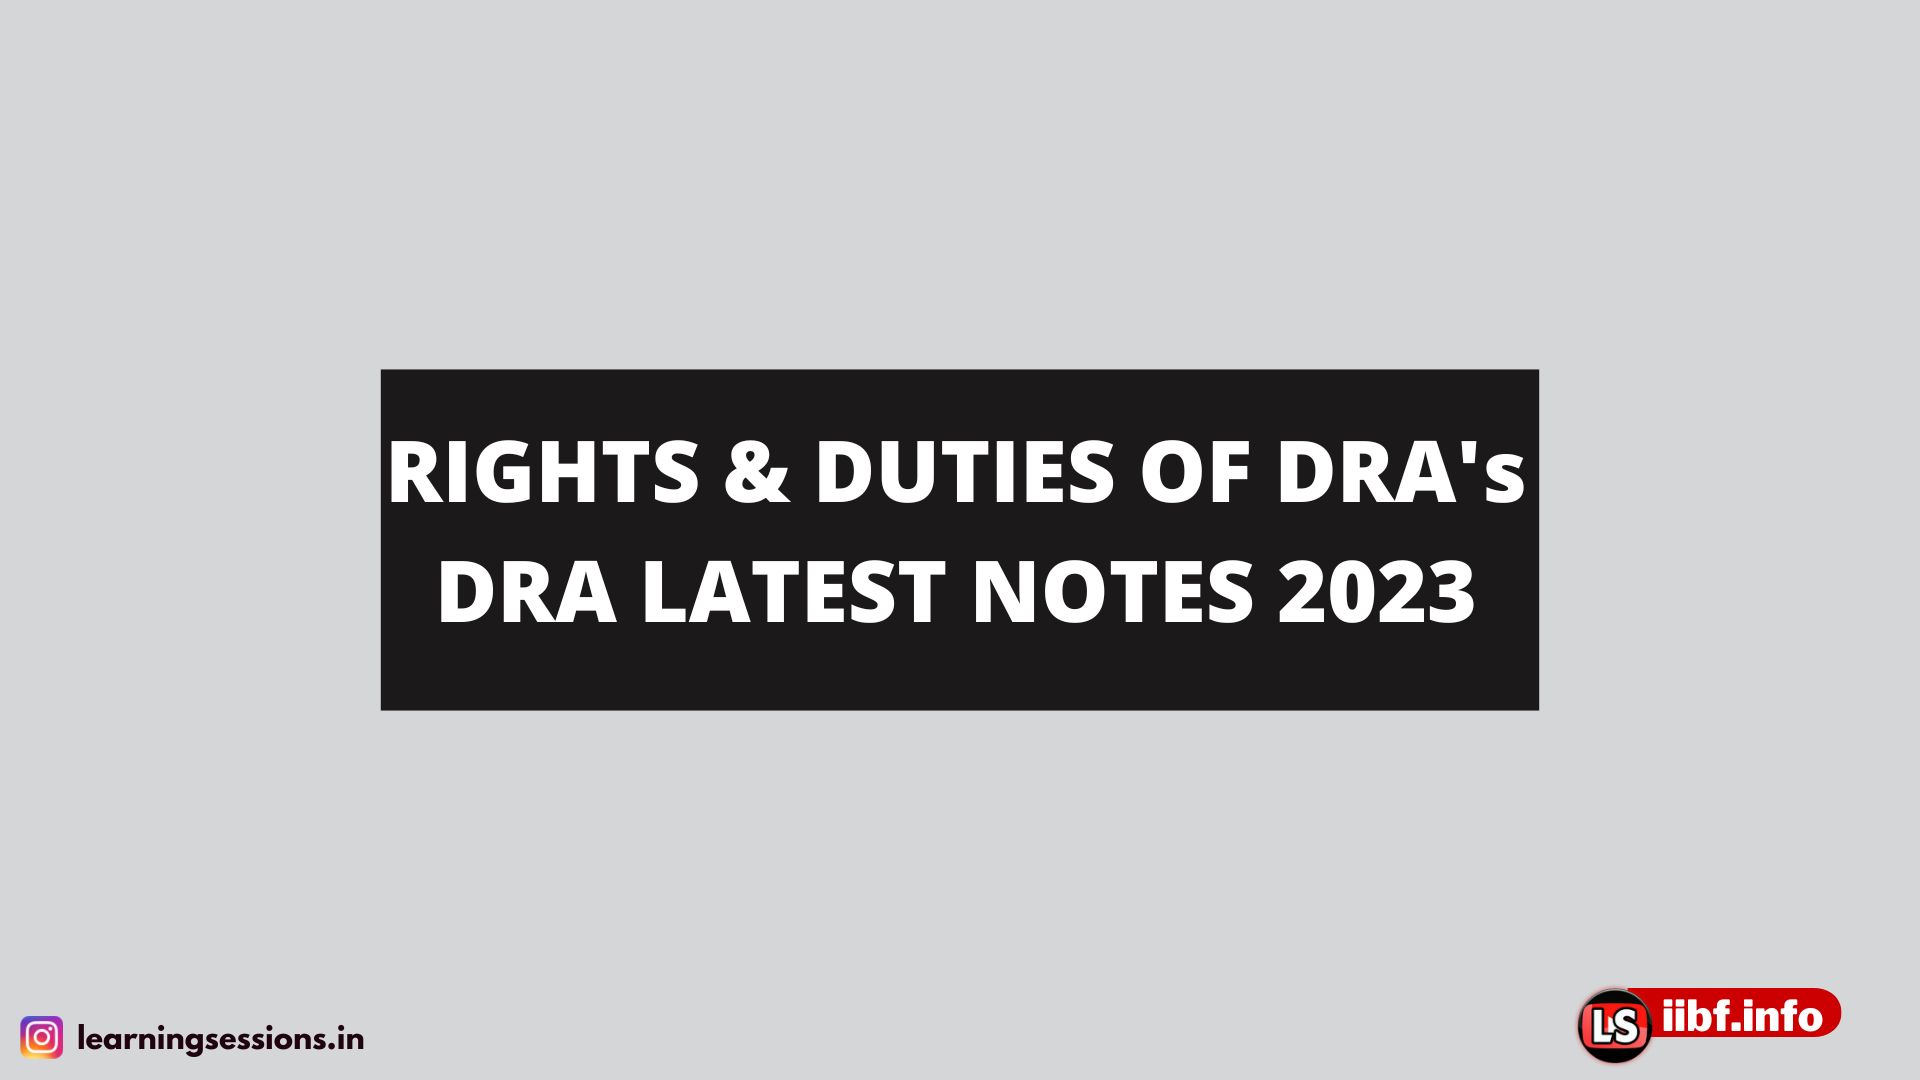 RIGHTS & DUTIES OF DRA's | DRA LATEST NOTES 2023